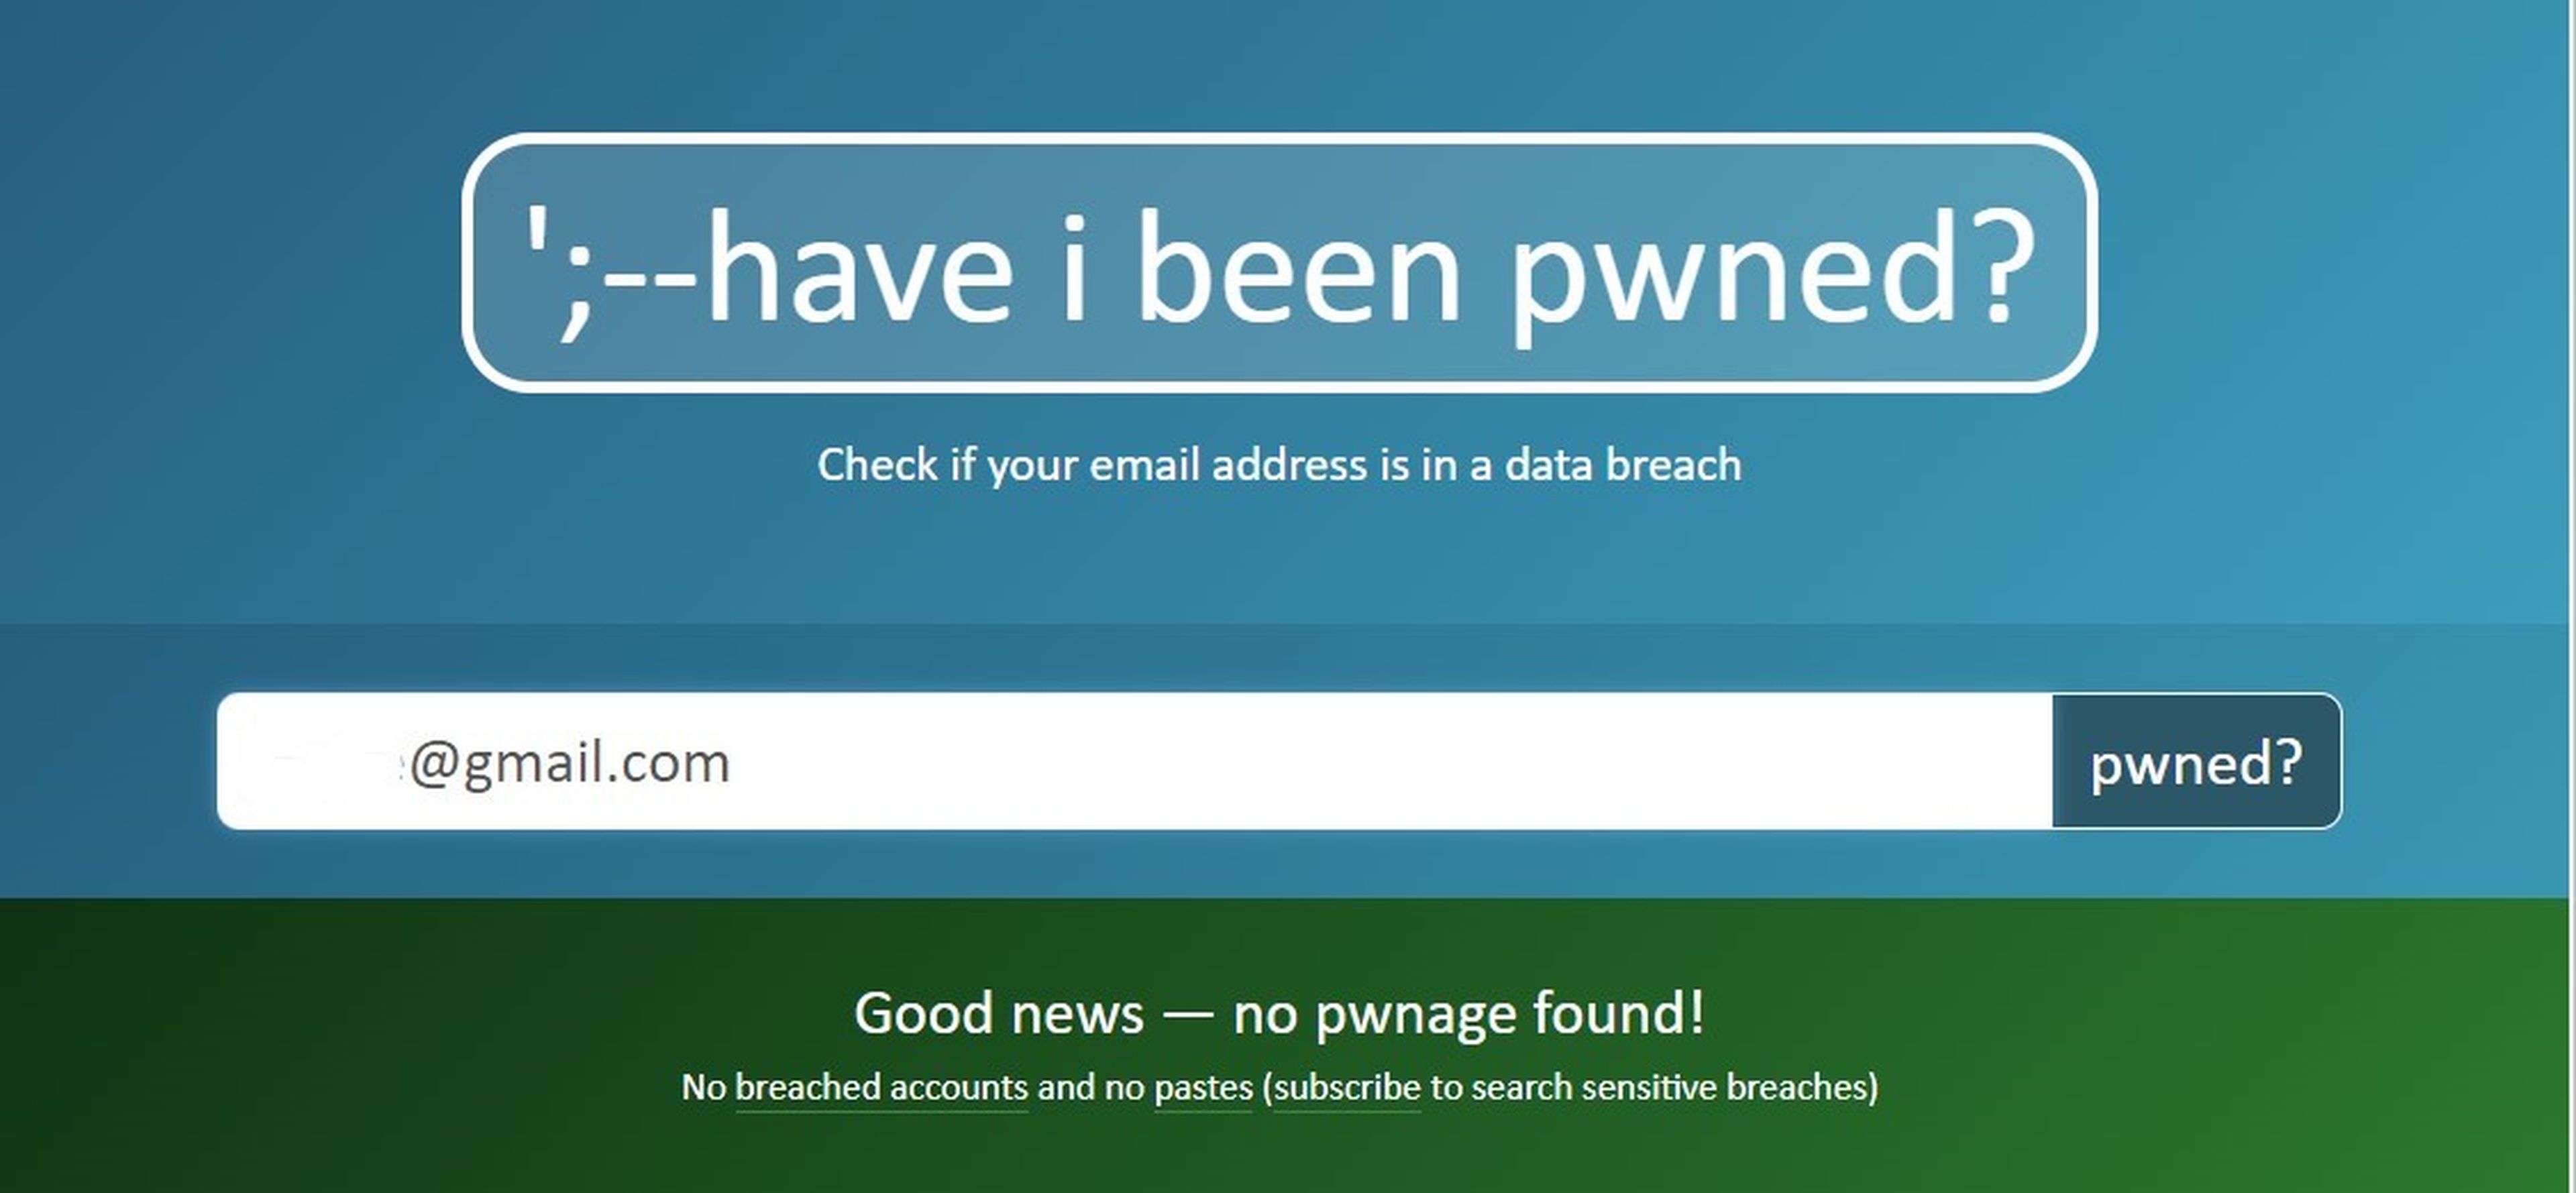 Have i been pwned?